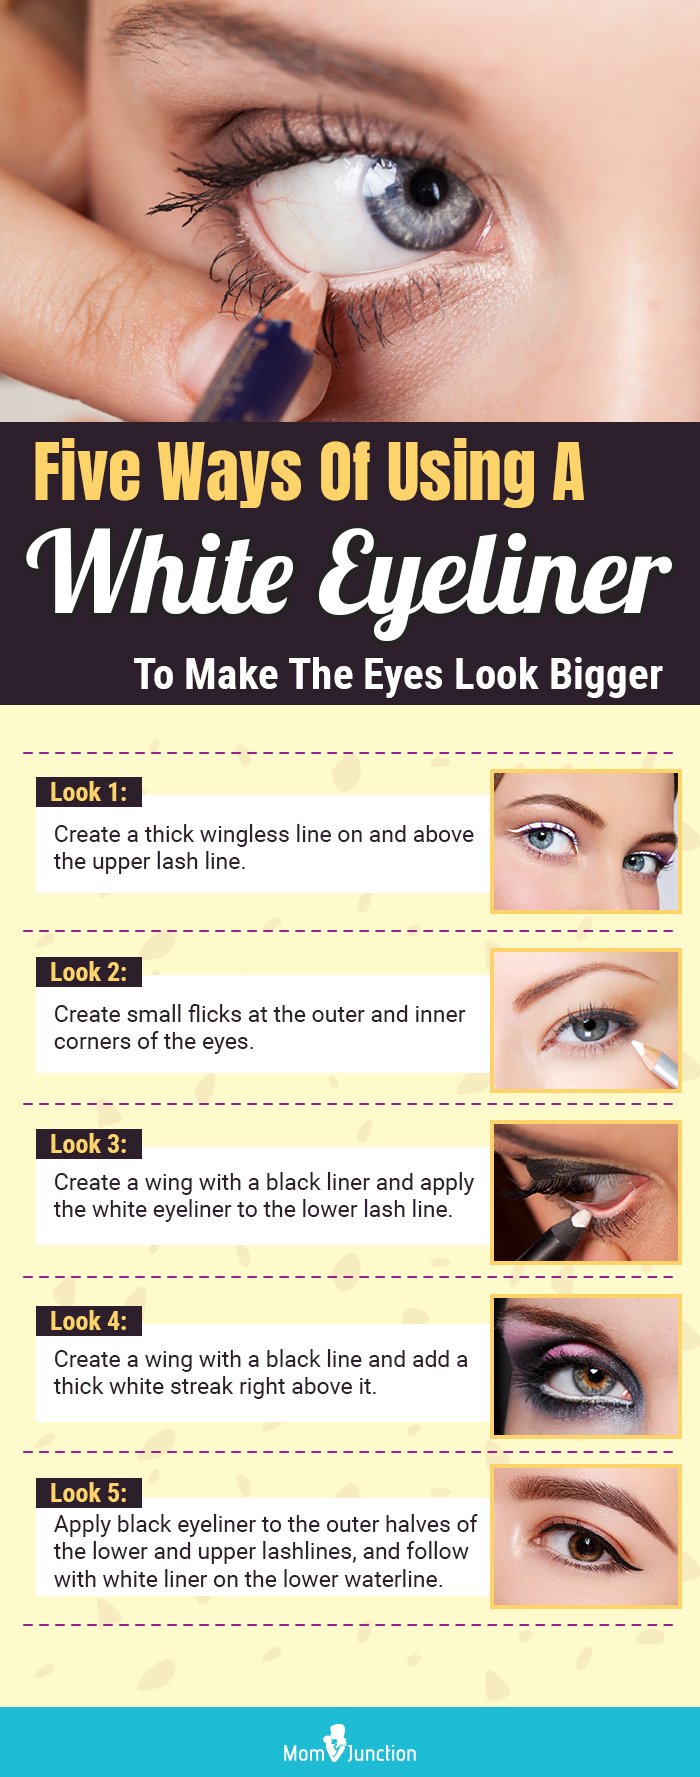 Five Ways Of Using A White Eyeliner To Make The Eyes Look Bigger (infographic)